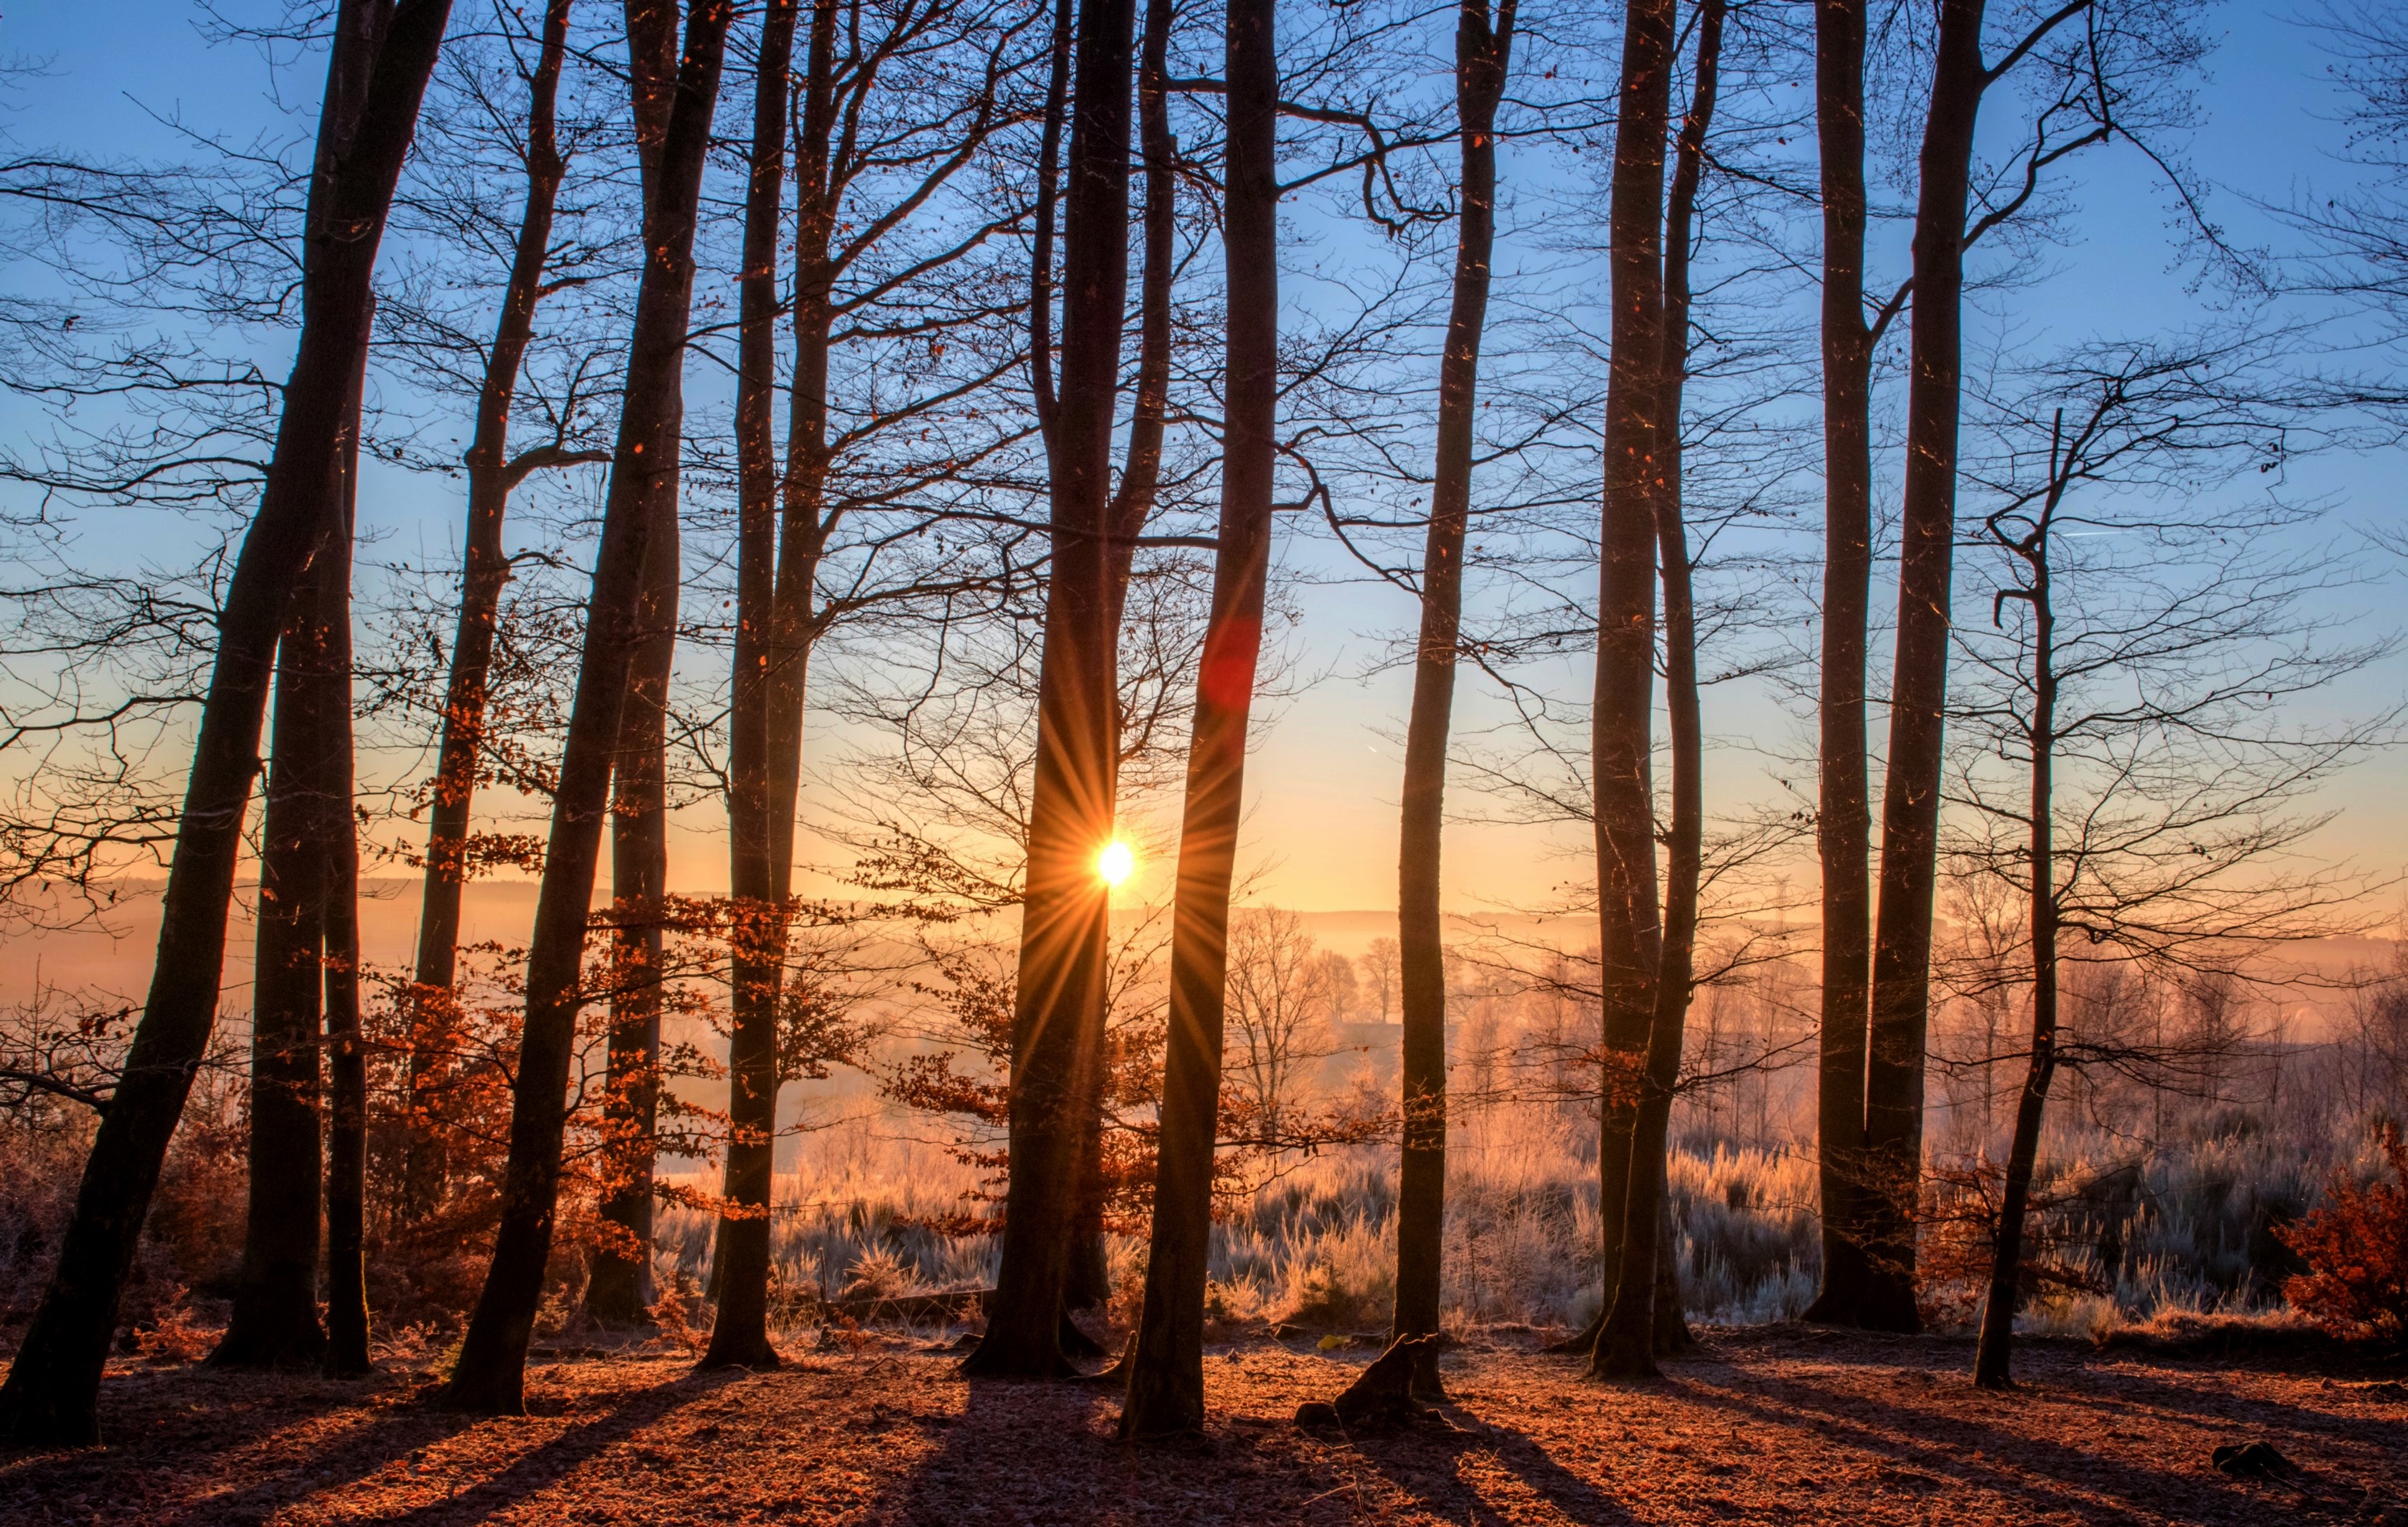 Freezing temperatures in the forest during the morning sunrise